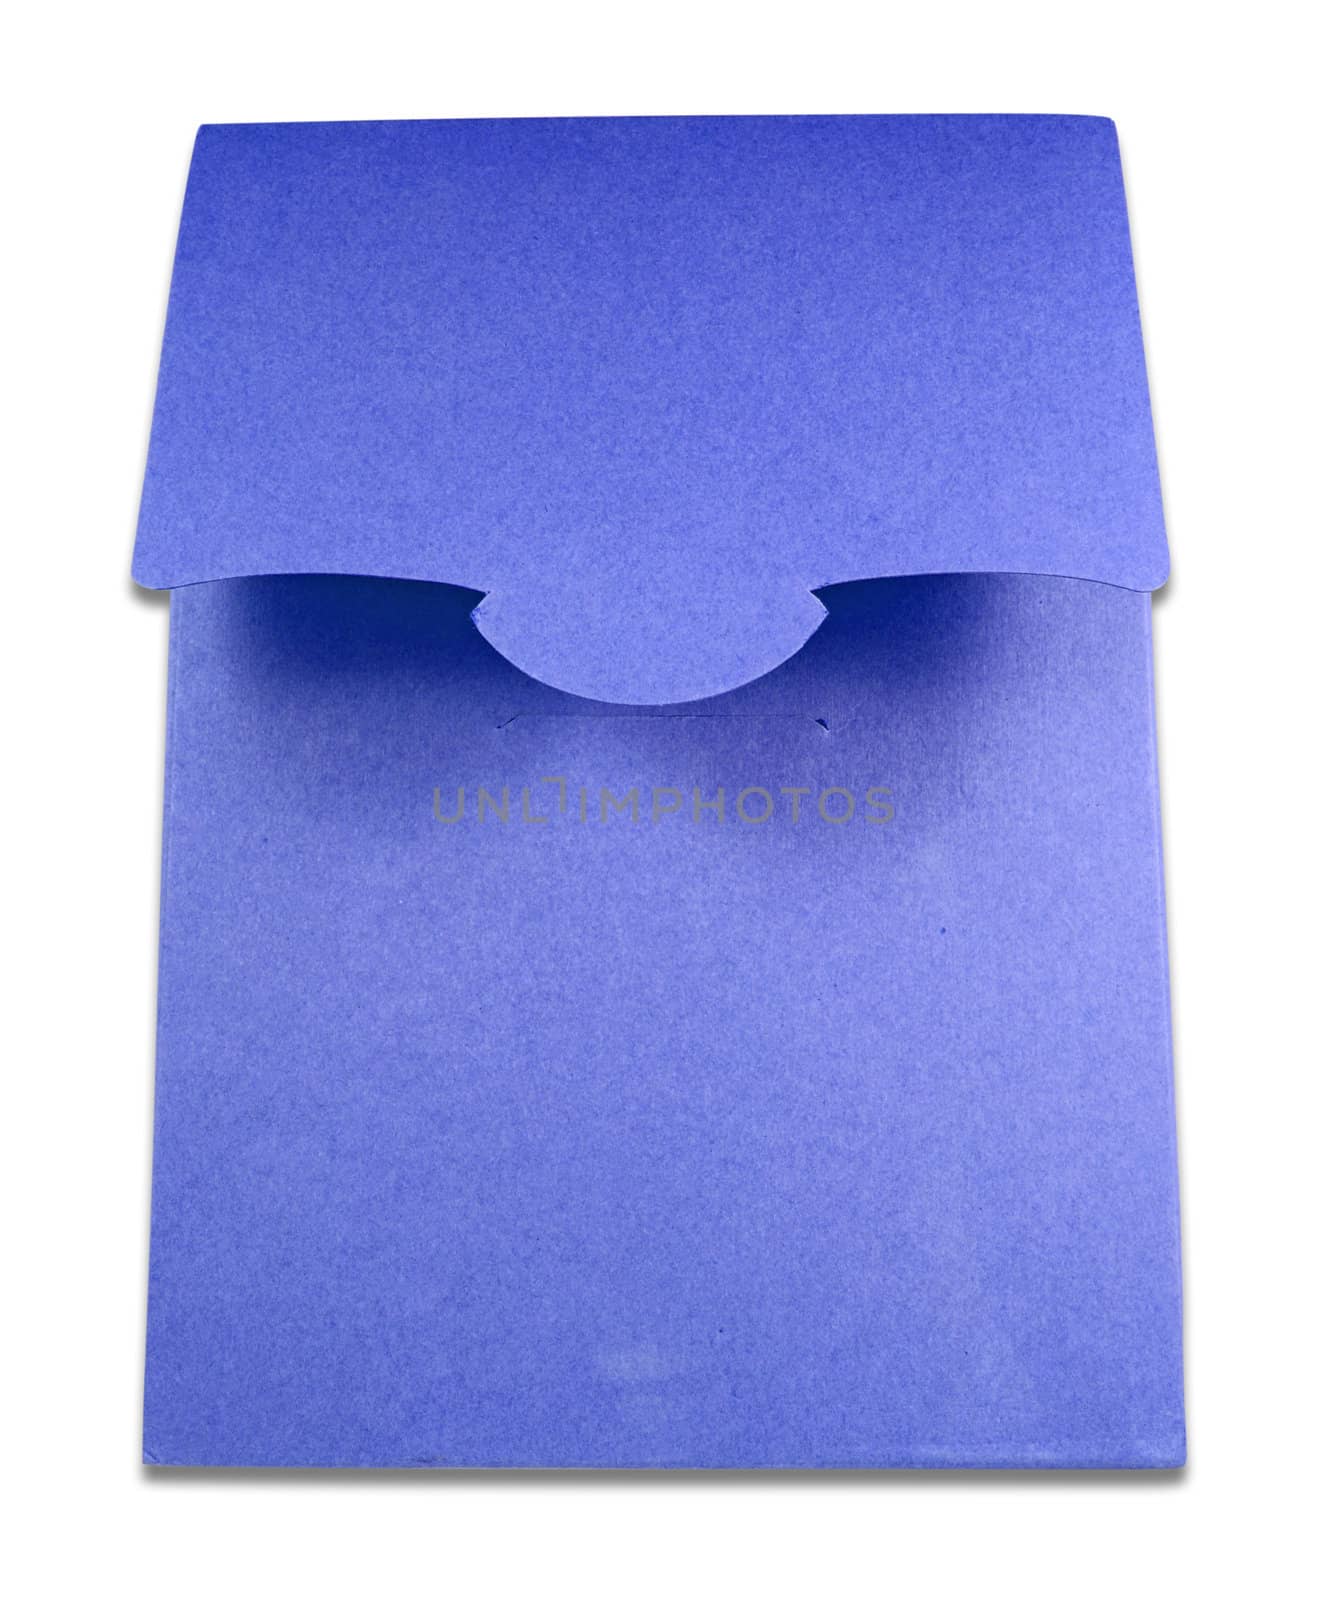 Blank package of blue box isolated on white background